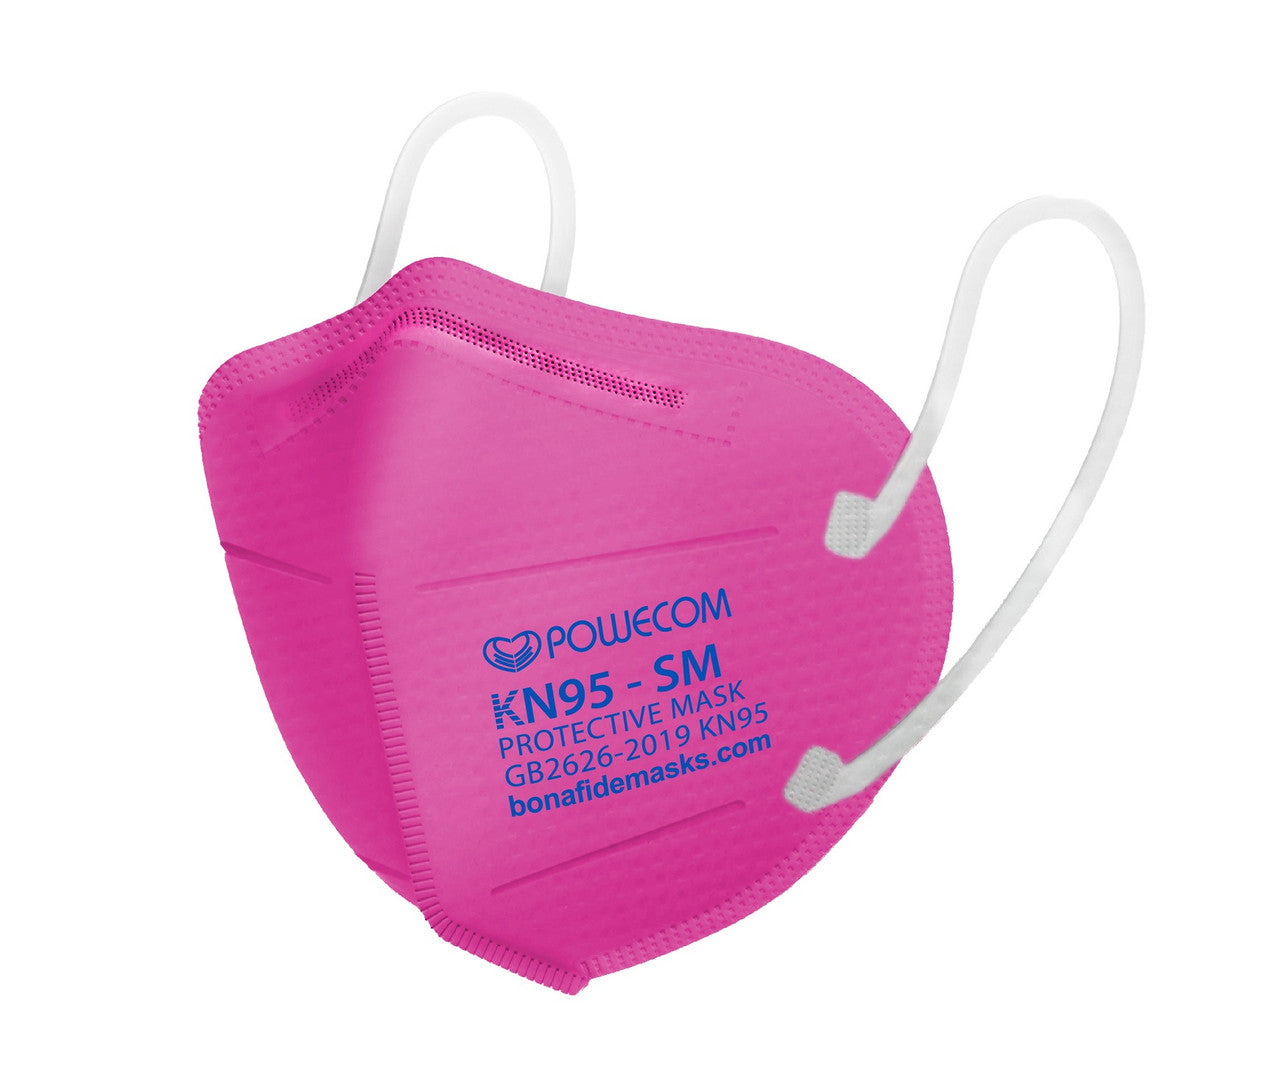 KN95 Child / Small Sized Respirator Face Mask - Pink - 10 Pack - Mellow Monkey